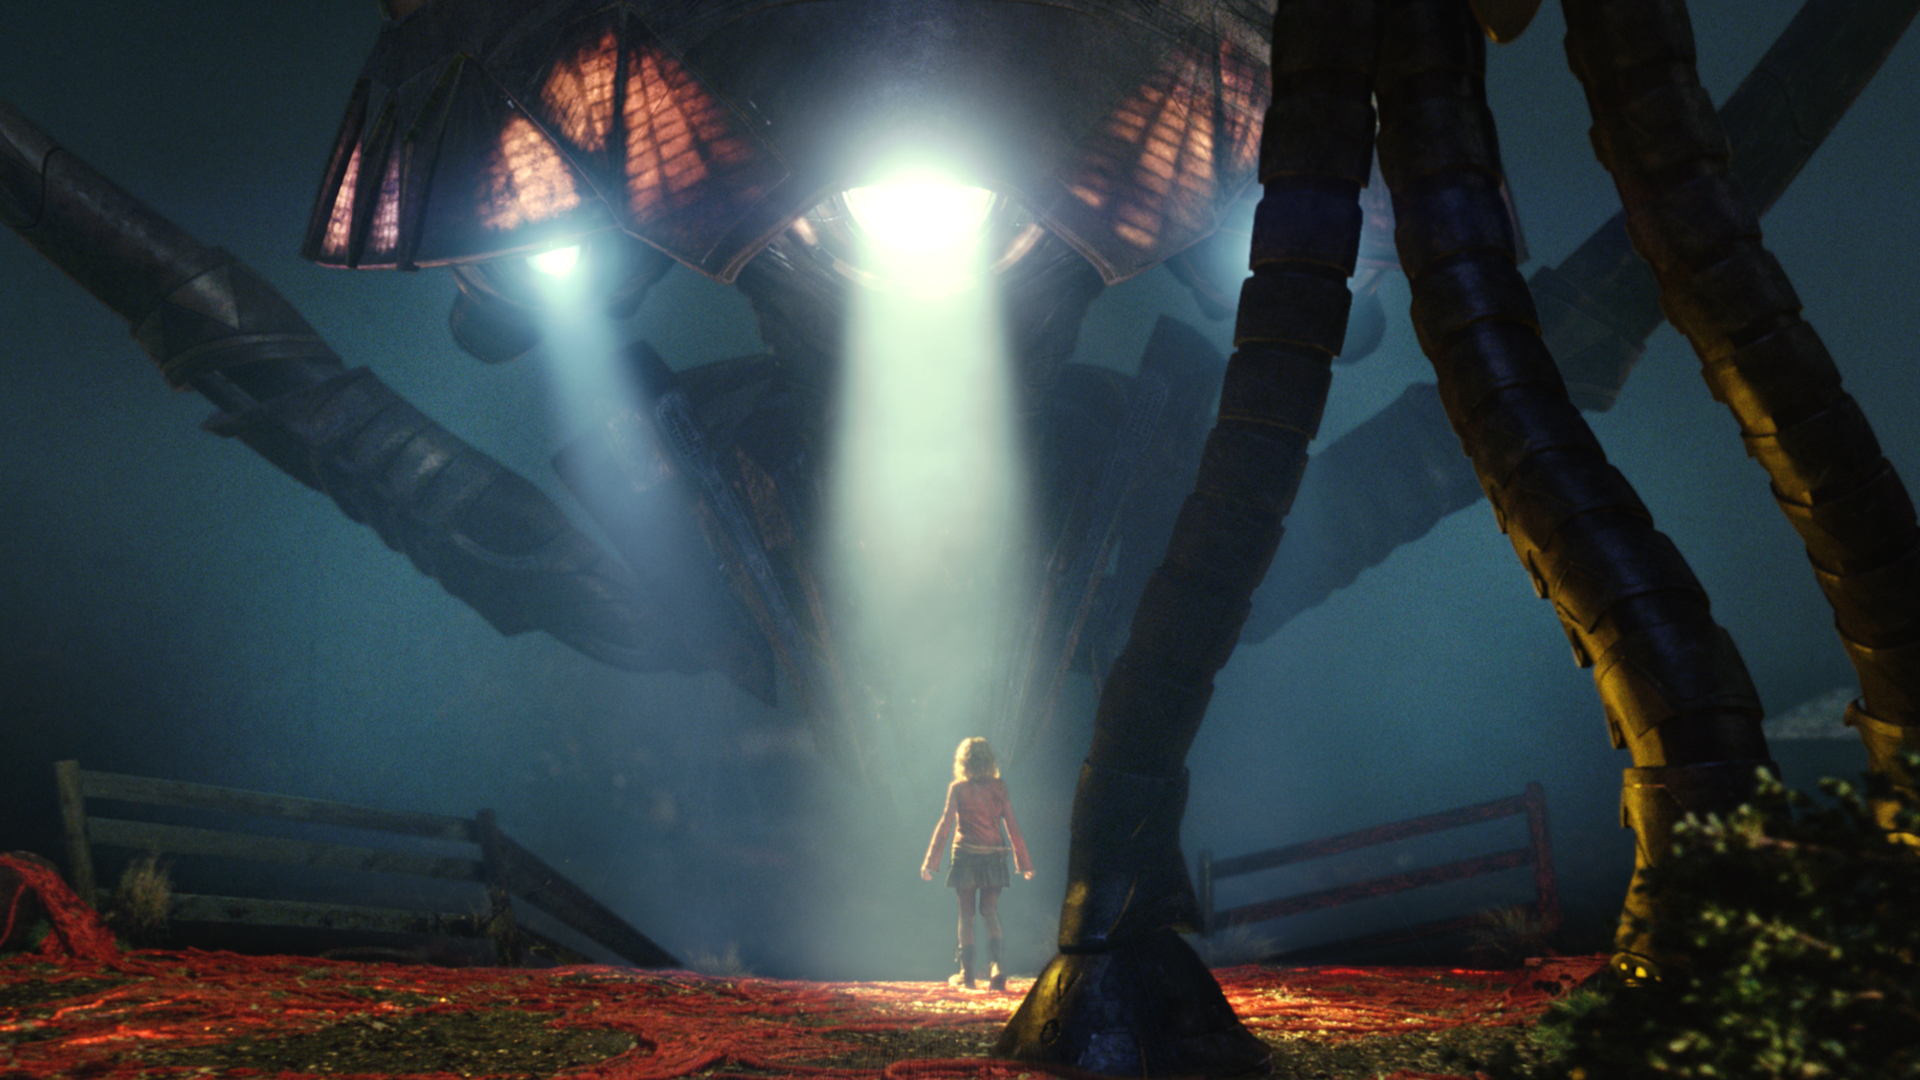 Rachel Ferrier (Dakota Fanning) stands alone beneath a massive alien tripod walker in the Academy Award®-nominated War of the Worlds (2005). © Paramount Pictures. All Rights Reserved.